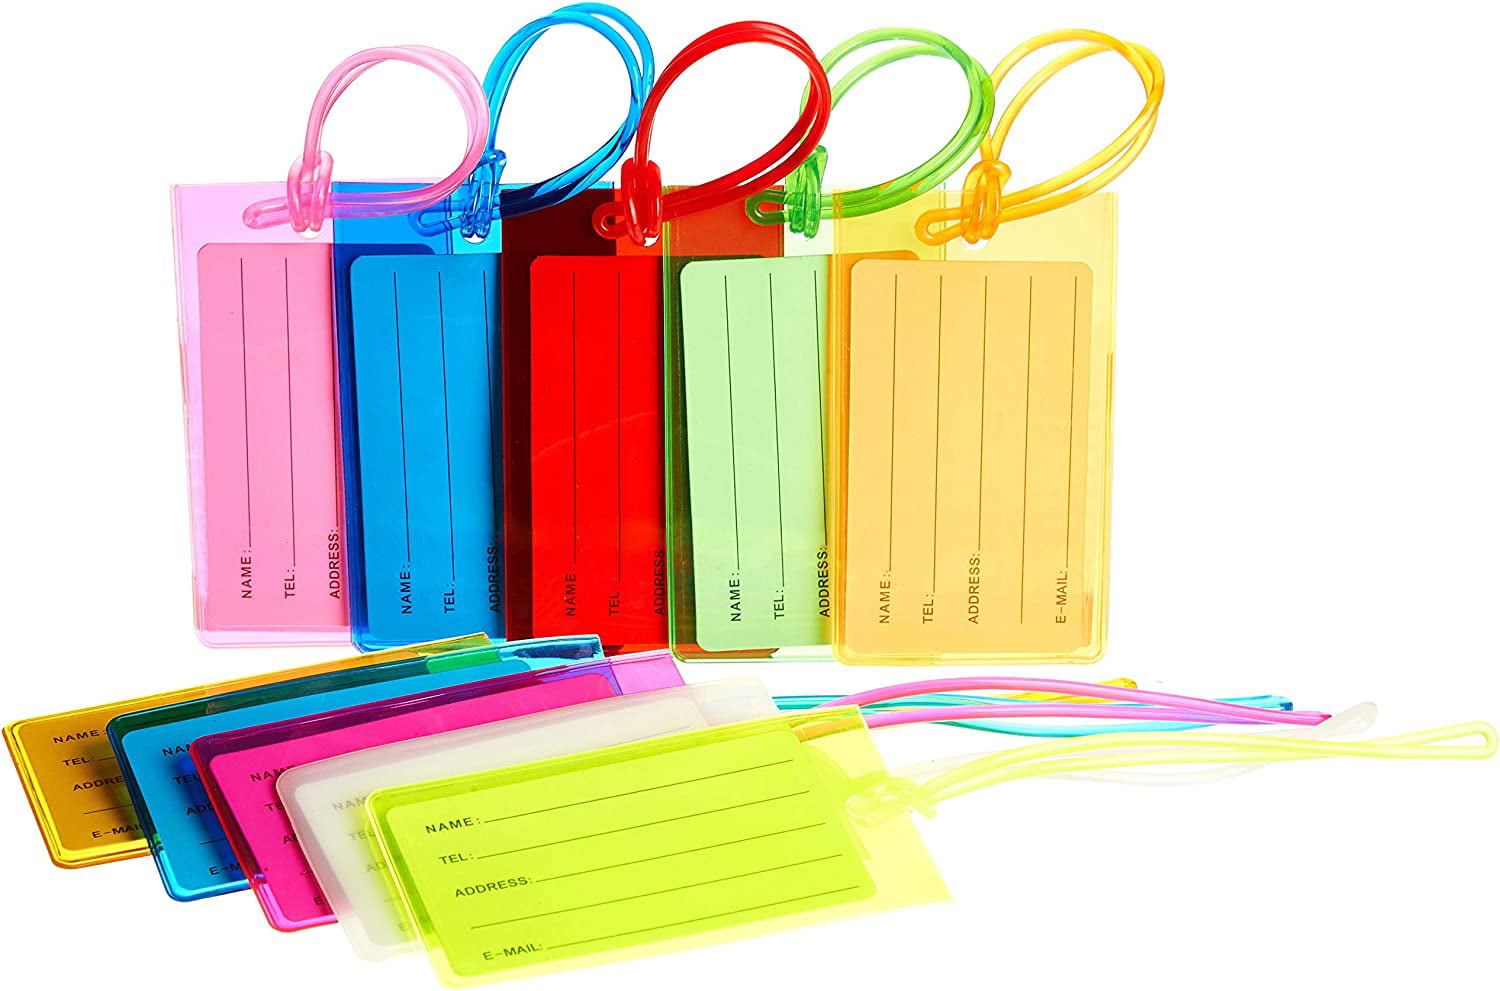 Wjpophn 10 Pcs Luggage Tags 34x19 Inches Plastic Luggage Identifiers with Lanyard Name Tags Travel Accessories Waterproof ID Tags Multi-Color Airplane